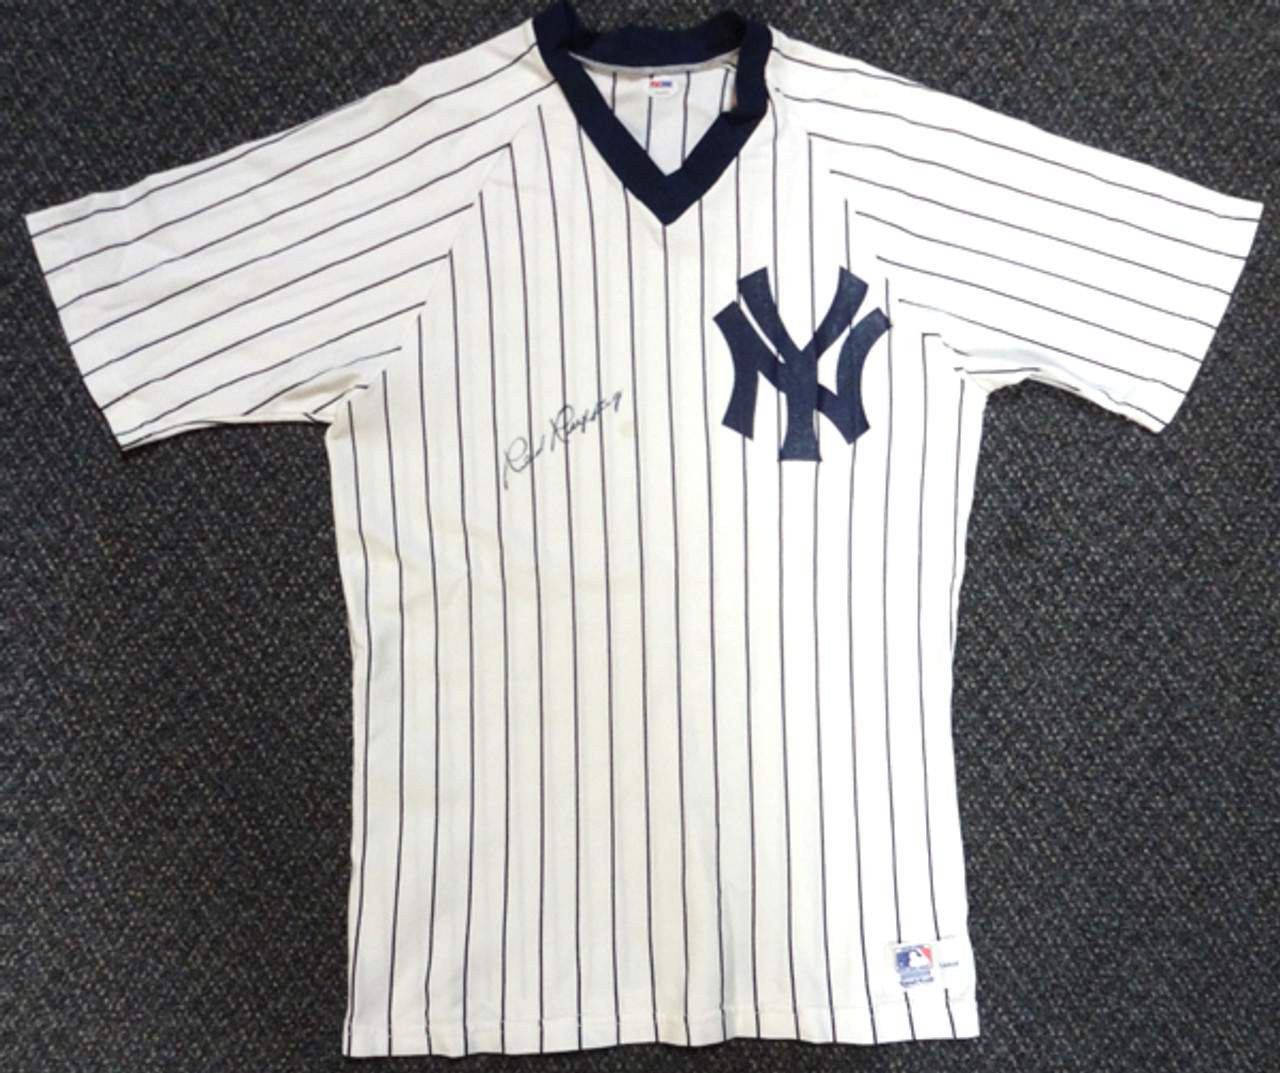 New York Yankees Red Ruffing Autographed White Jersey PSA/DNA #V11072 -  Mill Creek Sports